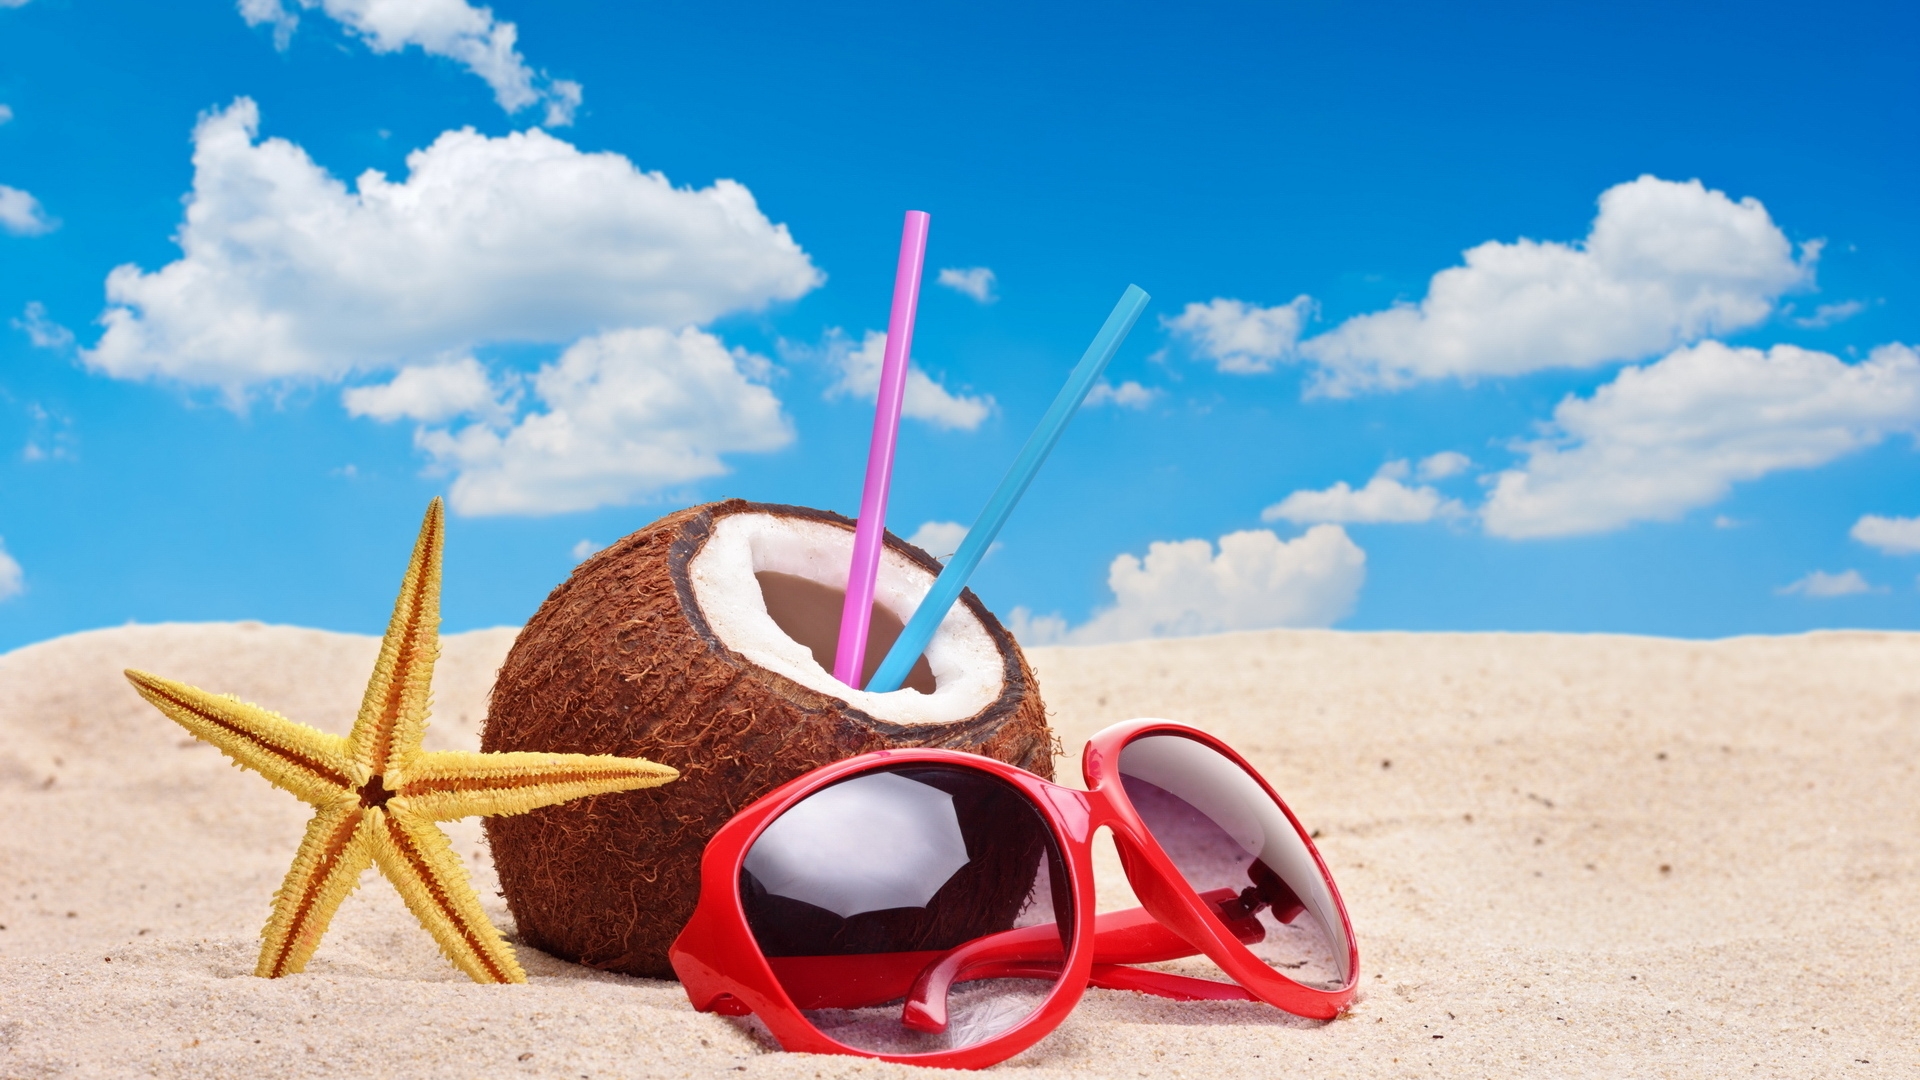 Summer Holiday Wallpapers | Wallpapers, Backgrounds, Images, Art ...